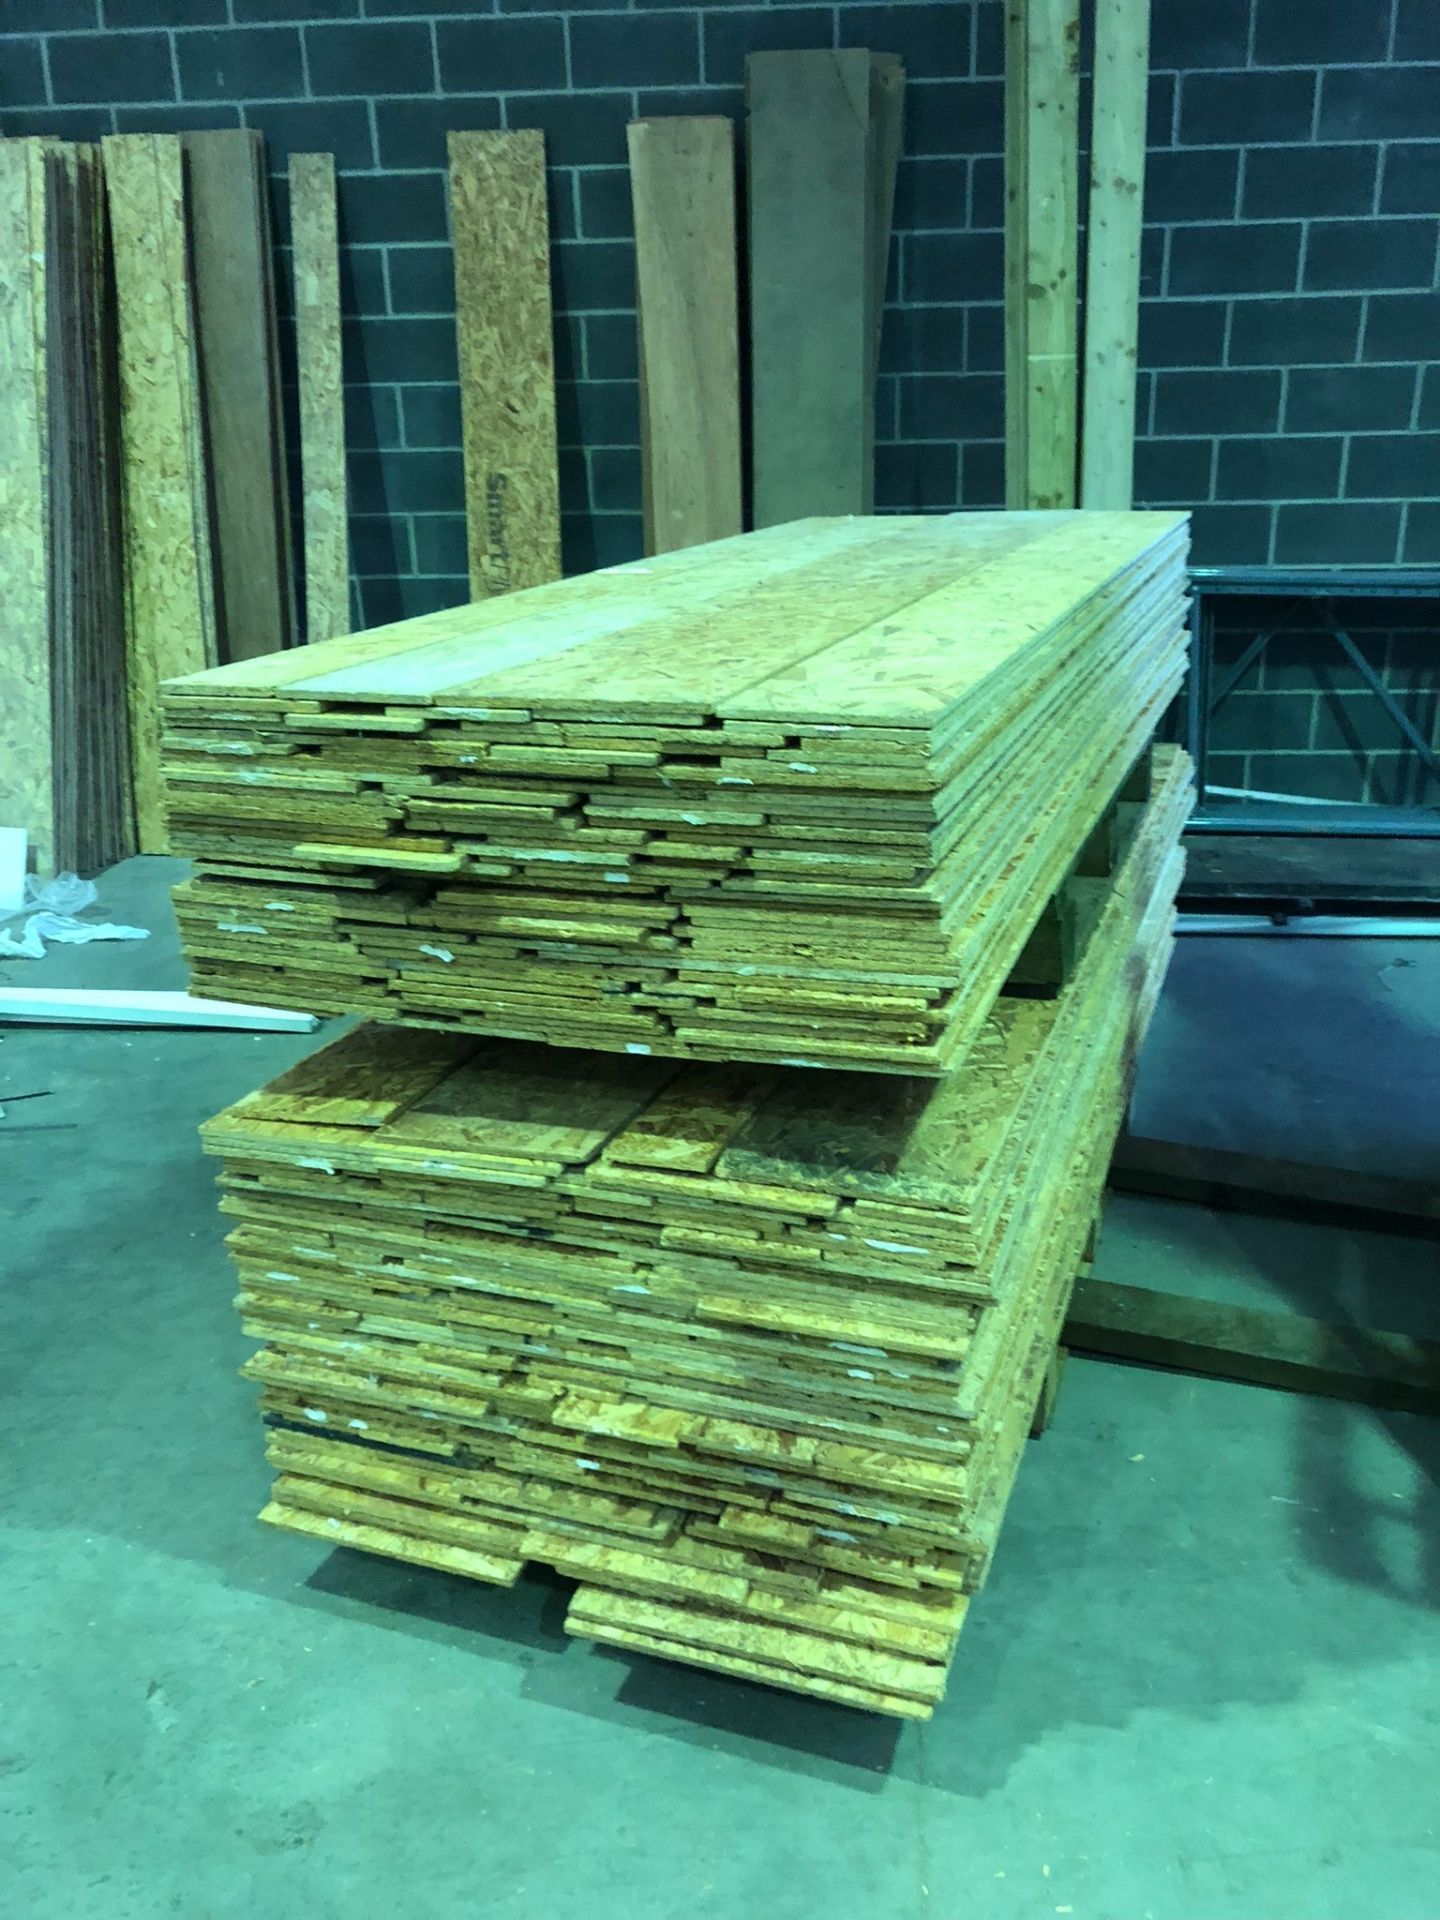 2 PALLETS OF 12MM OSB BOARD PLYWOOD RIPS BETWEEN 6INCH - 20INCH - 96 FULL SHEETS WORTH APPROX - Image 7 of 7